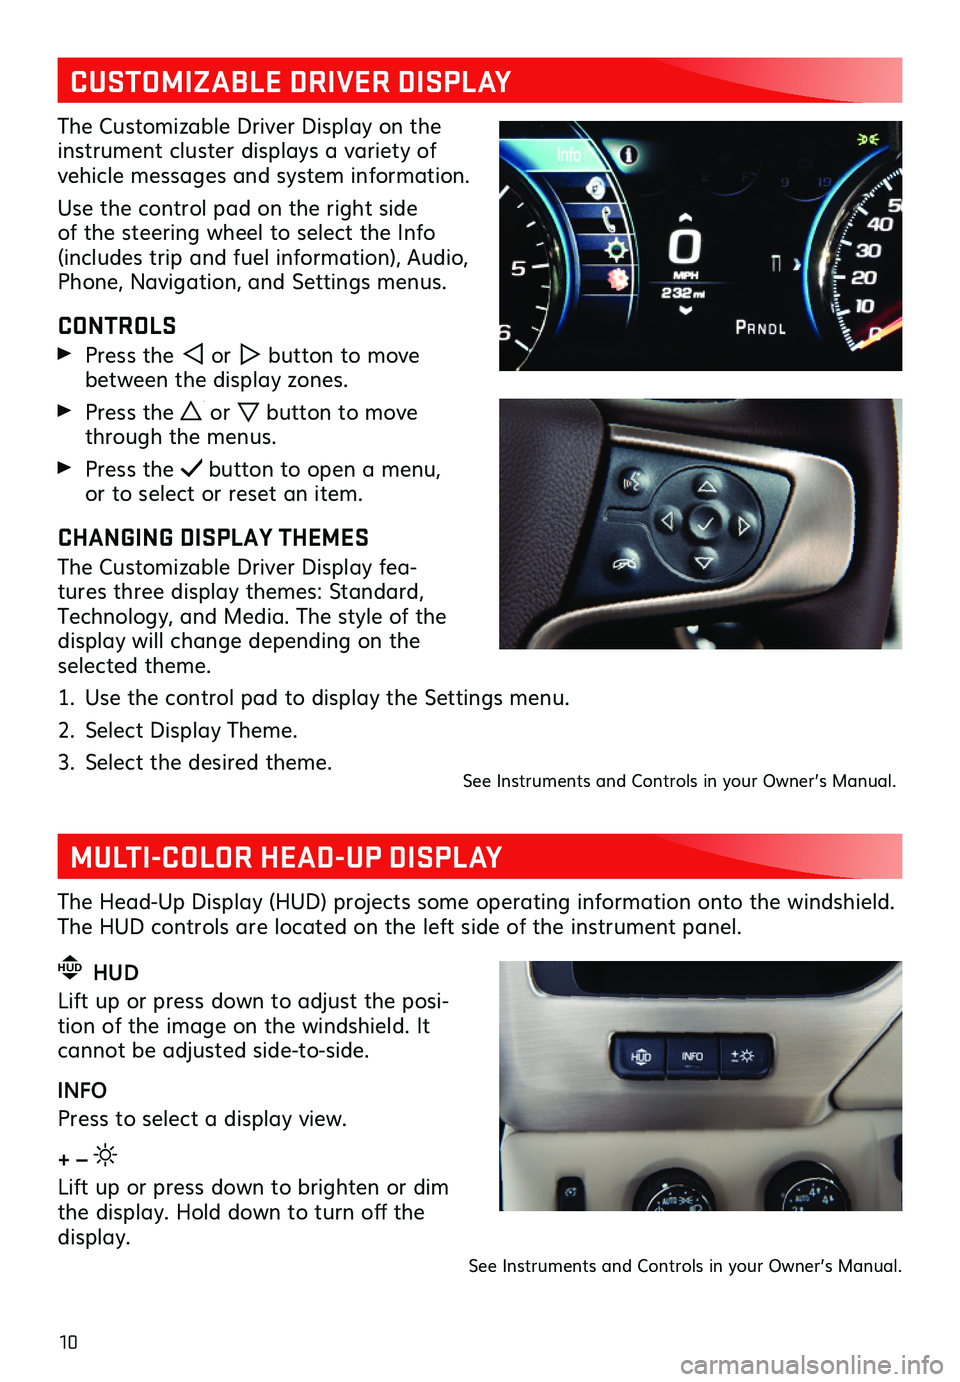 GMC YUKON XL 2019  Get To Know Guide 10
MULTI-COLOR HEAD-UP DISPLAY
The Head-Up  Display (HUD) projects  some  operating  information  onto the windshield. The HUD controls are located on the left side of the instrument panel.